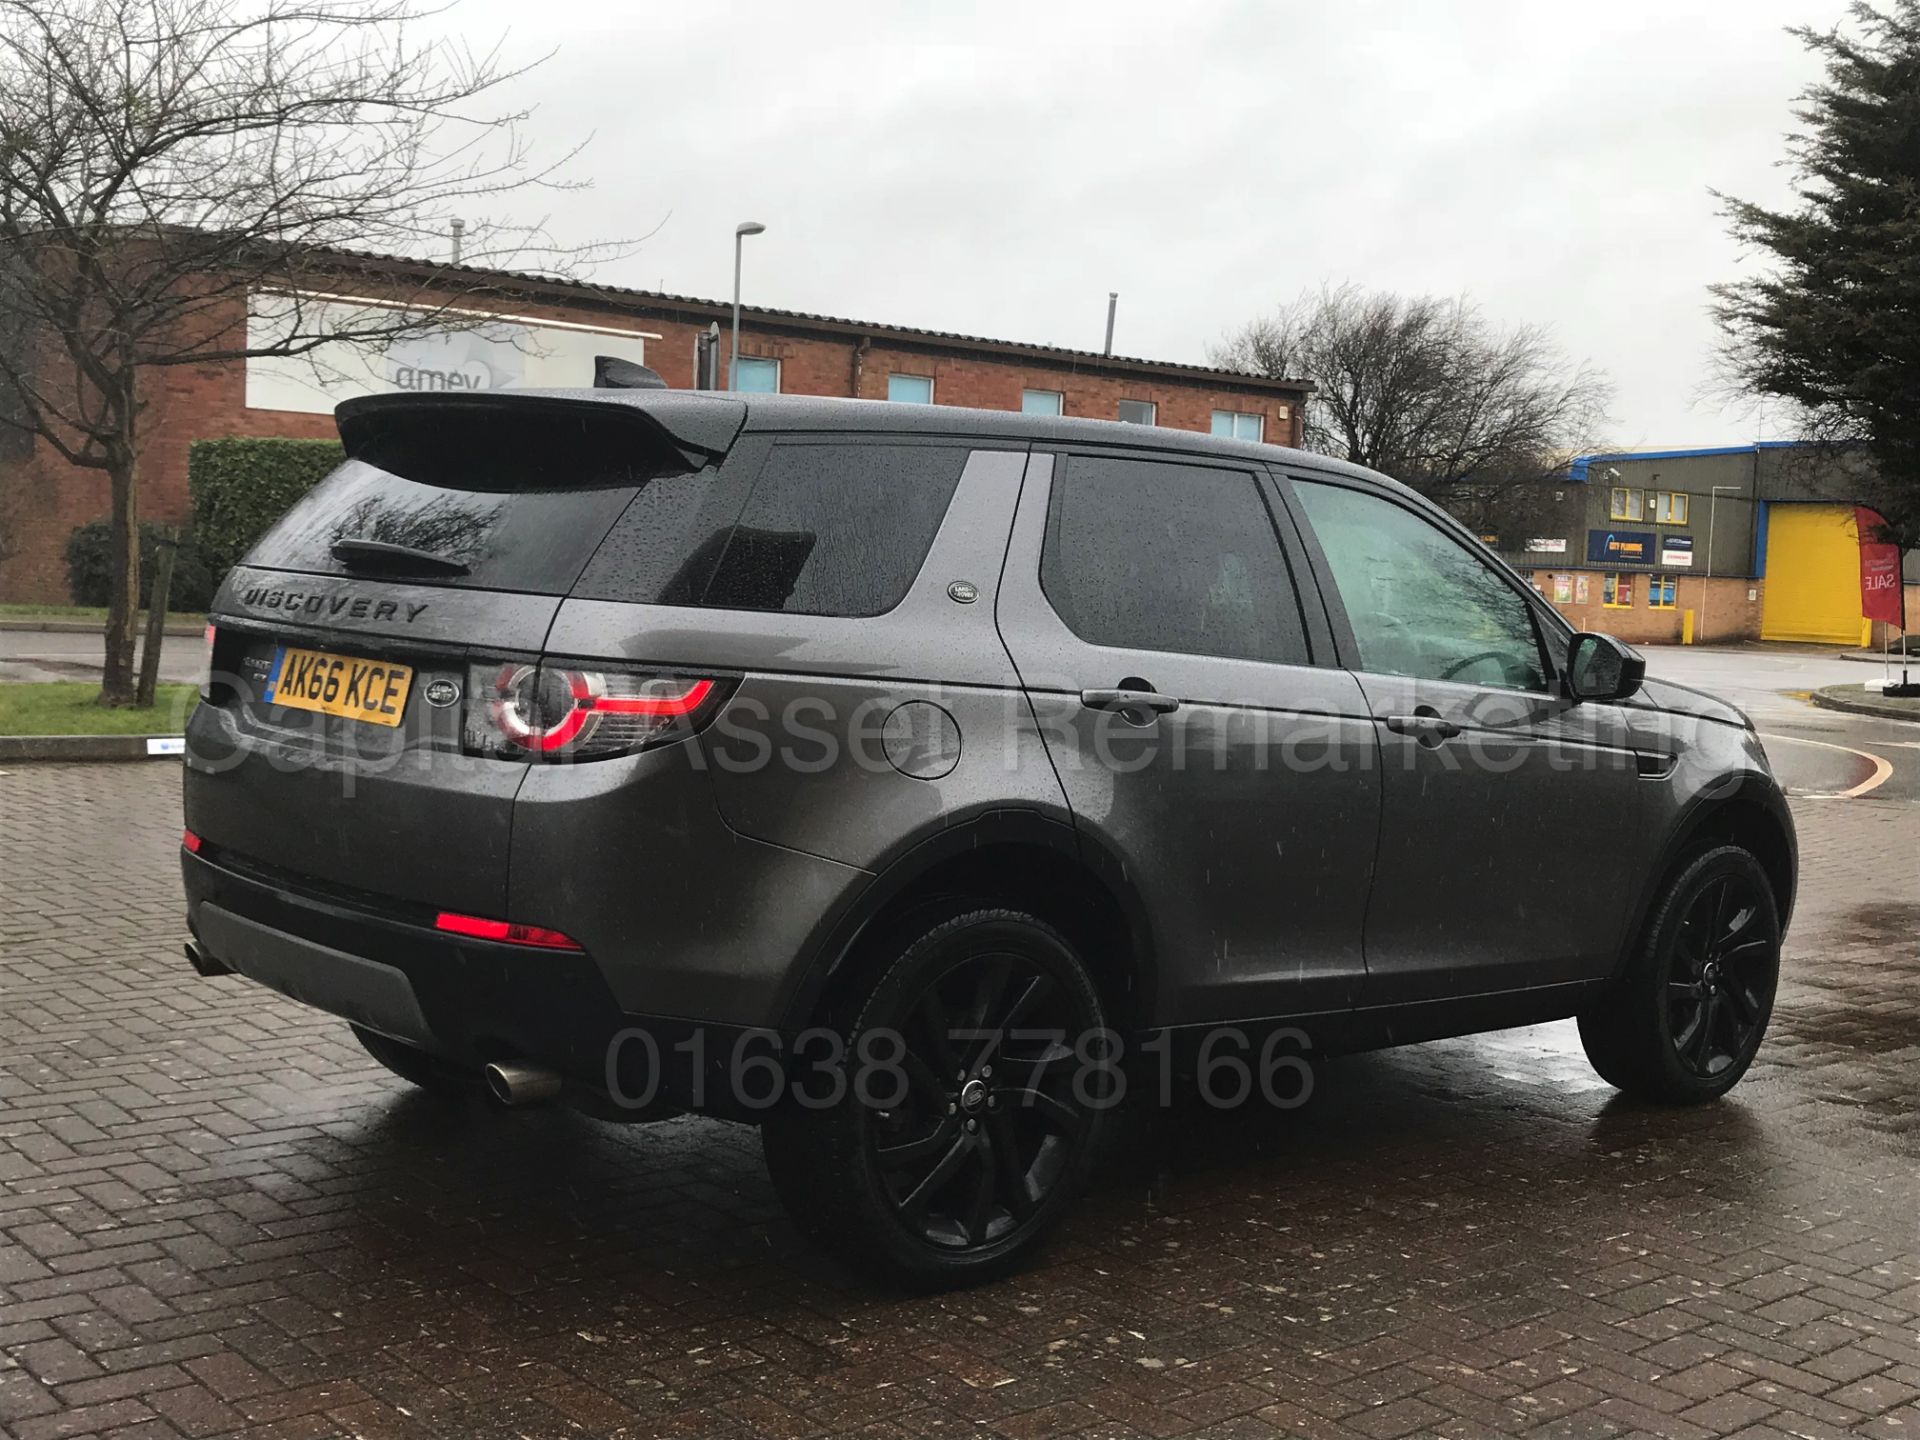 LAND ROVER DISCOVERY SPORT 'HSE - BLACK' (2017 MODEL) '2.0 TD4 - AUTO - 7 SEATER' *MASSIVE SPEC* - Image 9 of 53